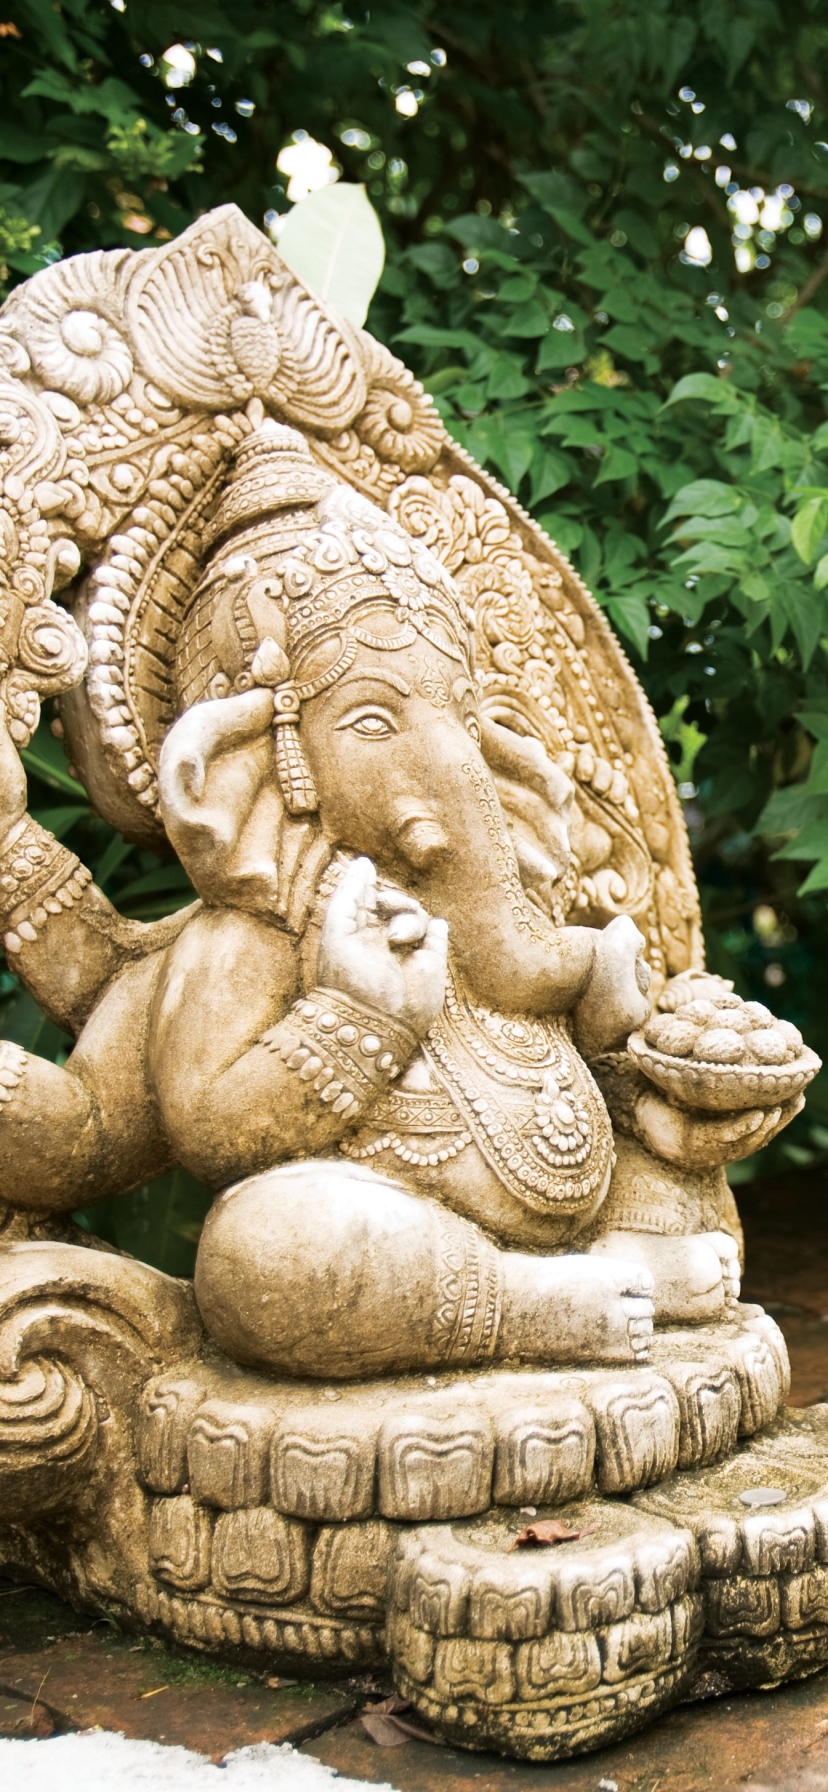 hinduism, religious, ganesh, statue wallpapers for tablet